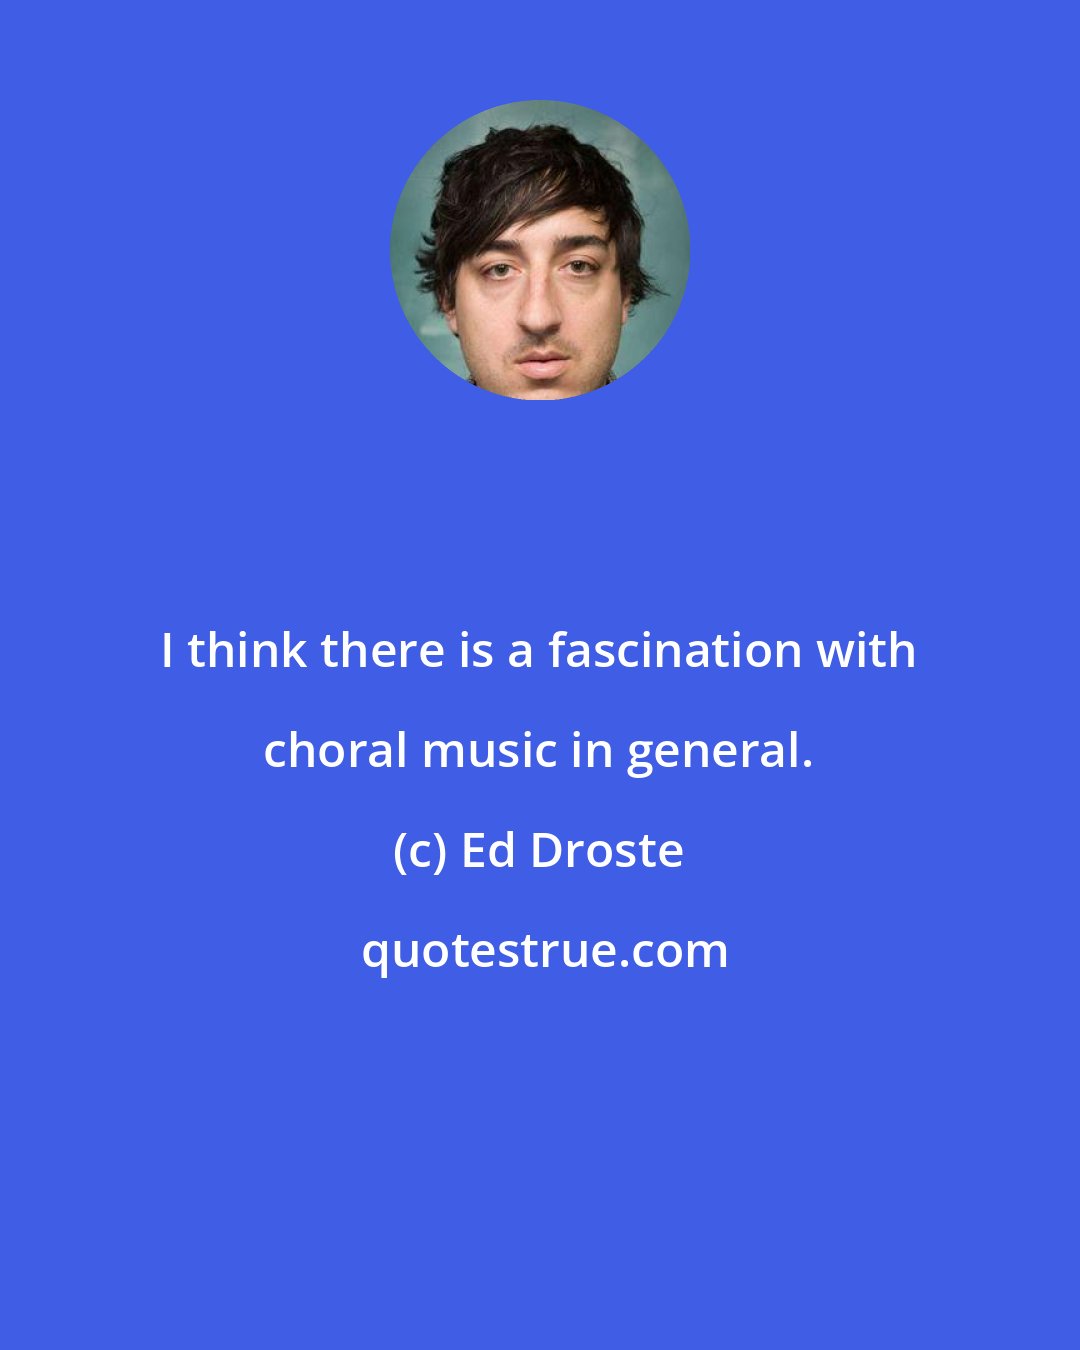 Ed Droste: I think there is a fascination with choral music in general.